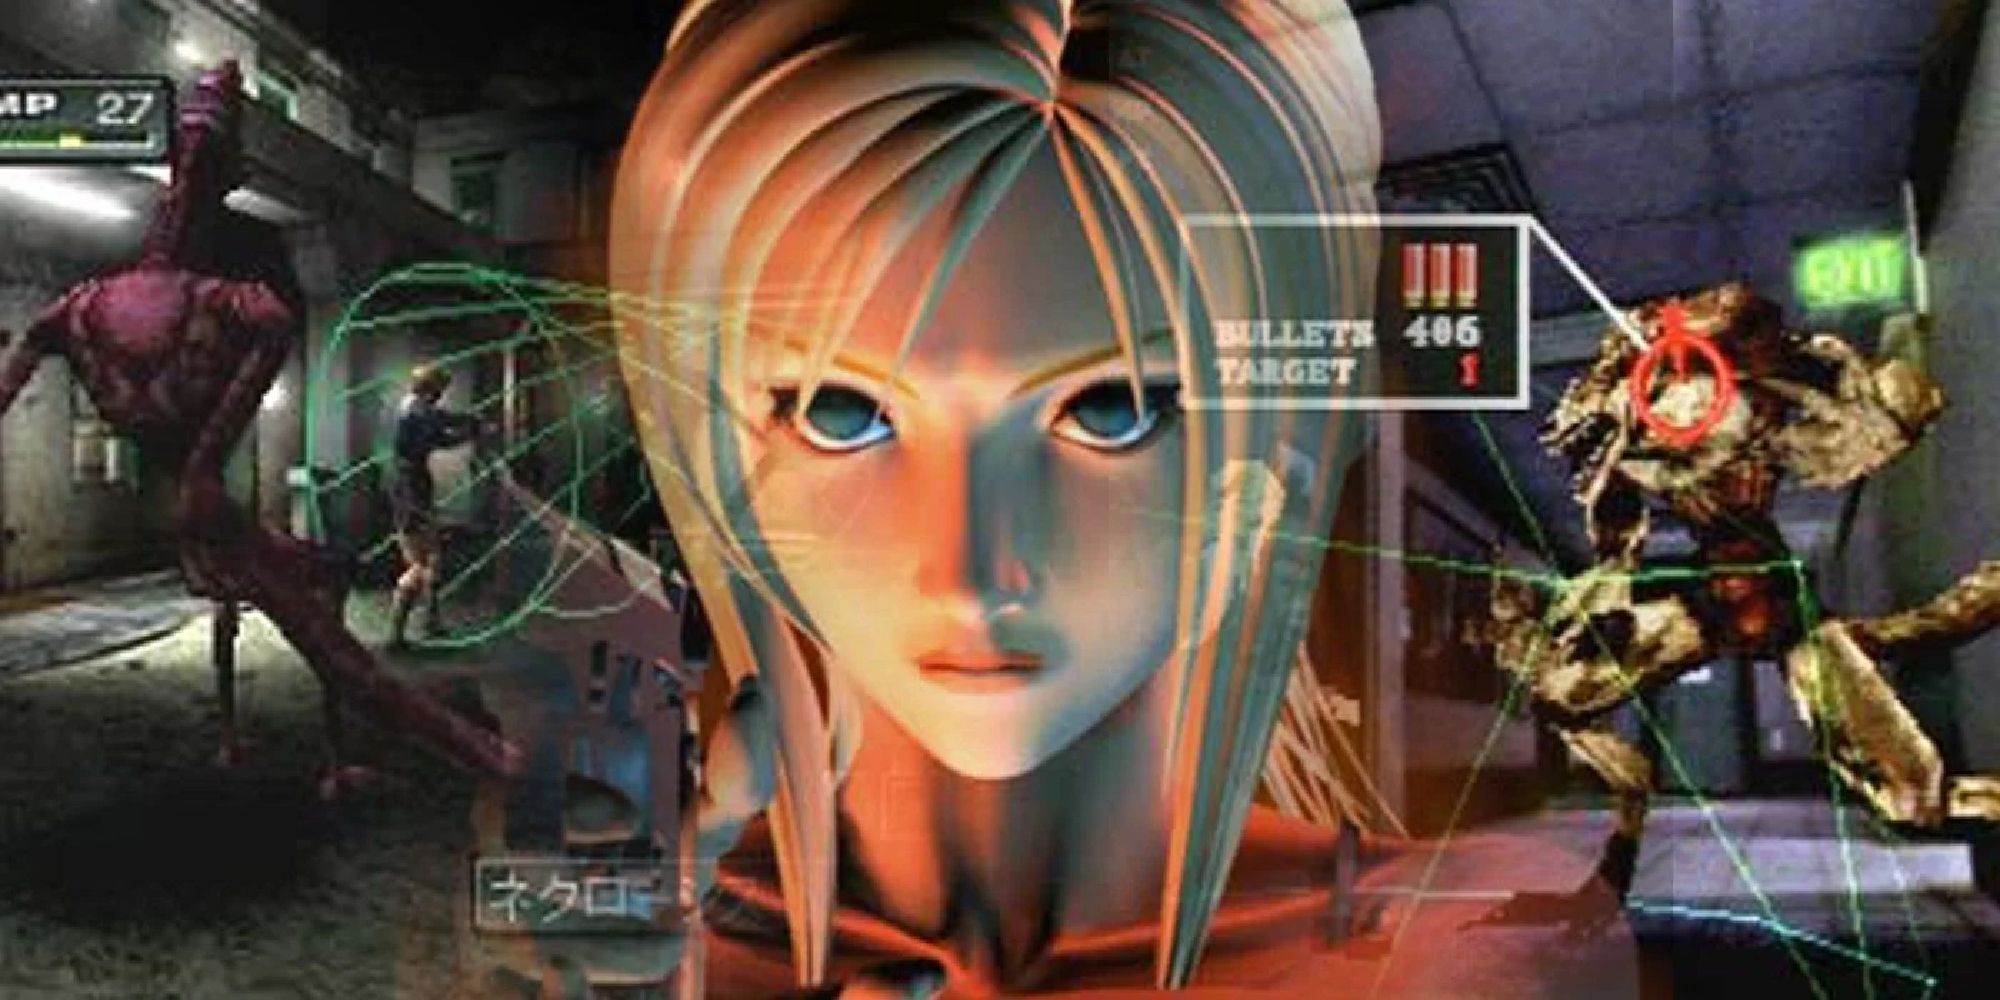 Parasite Eve's protagonist, Aya Brea, superimposed over images of its battle system